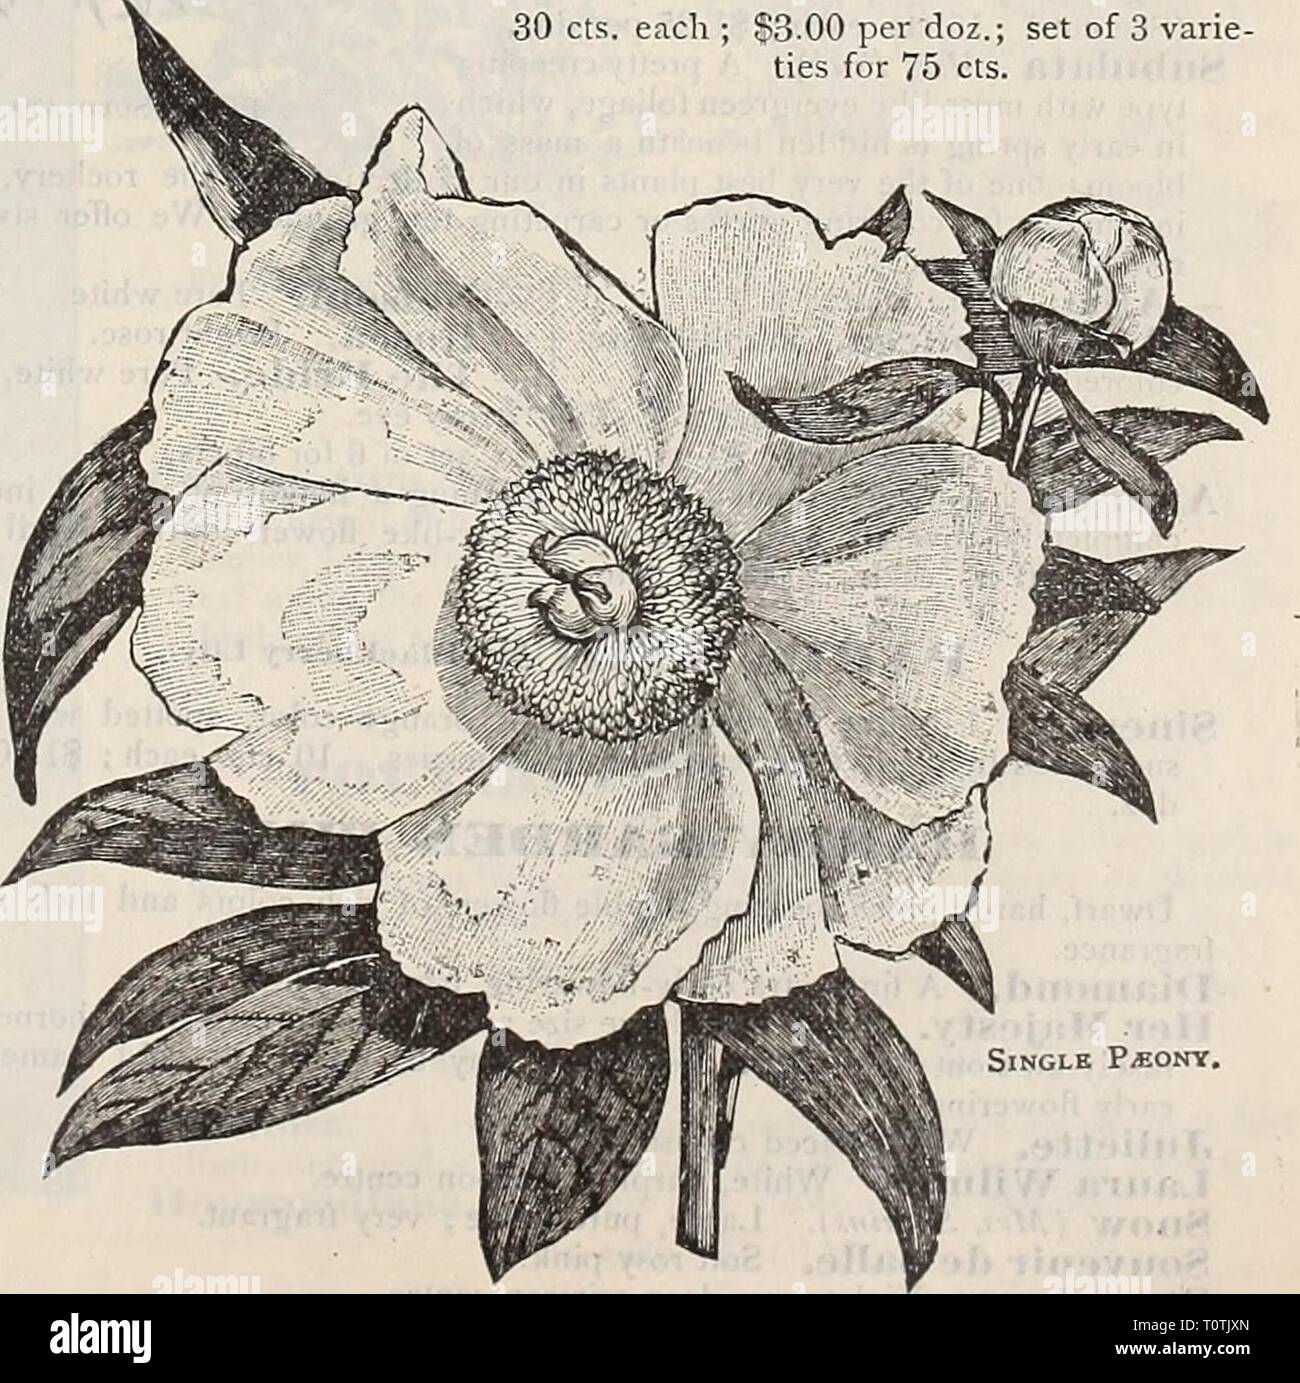 Dreer's 1901 garden calendar (1901) Dreer's 1901 garden calendar  dreers1901garden1901henr Year: 1901  PiEONIA TeNUIFOLIA. Double Herbaceous Paeonies. The Herbaceous PLconies are exceedingly hardy, and will succeed in any ordinary garden soil, well enriched with good manure. During the summer months mulching will be beneficial to the roots, especially on dry soils. (See cut.) We offer a splendid assortment in twelve varieties, viz : Agida. Brilliant red ; very free-flowering. Caroline Allain. Beautiful blush, with sulphur centre and white tips. Due de Cazes. Anemone formed, bright red with sal Stock Photo